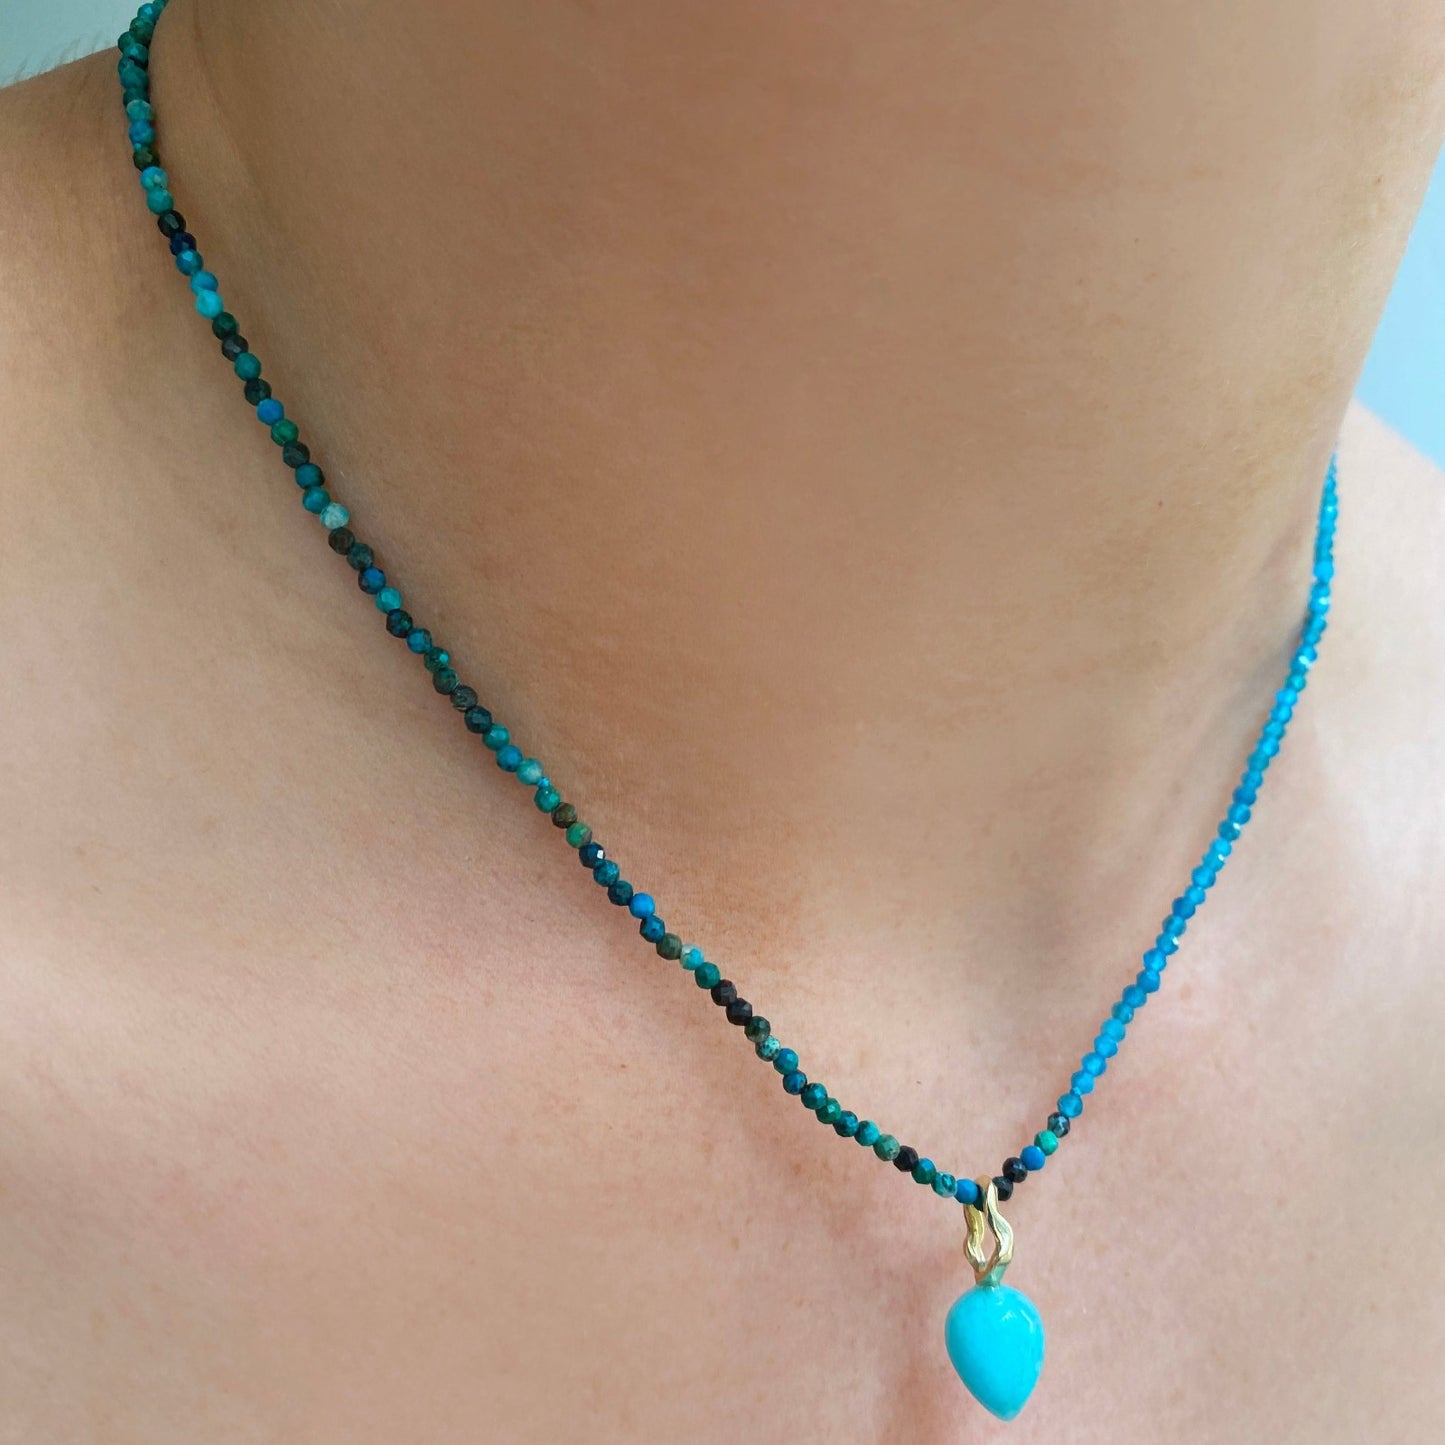 Amazonite acorn drop charm. Styled on a neck hanging from a beaded necklace.